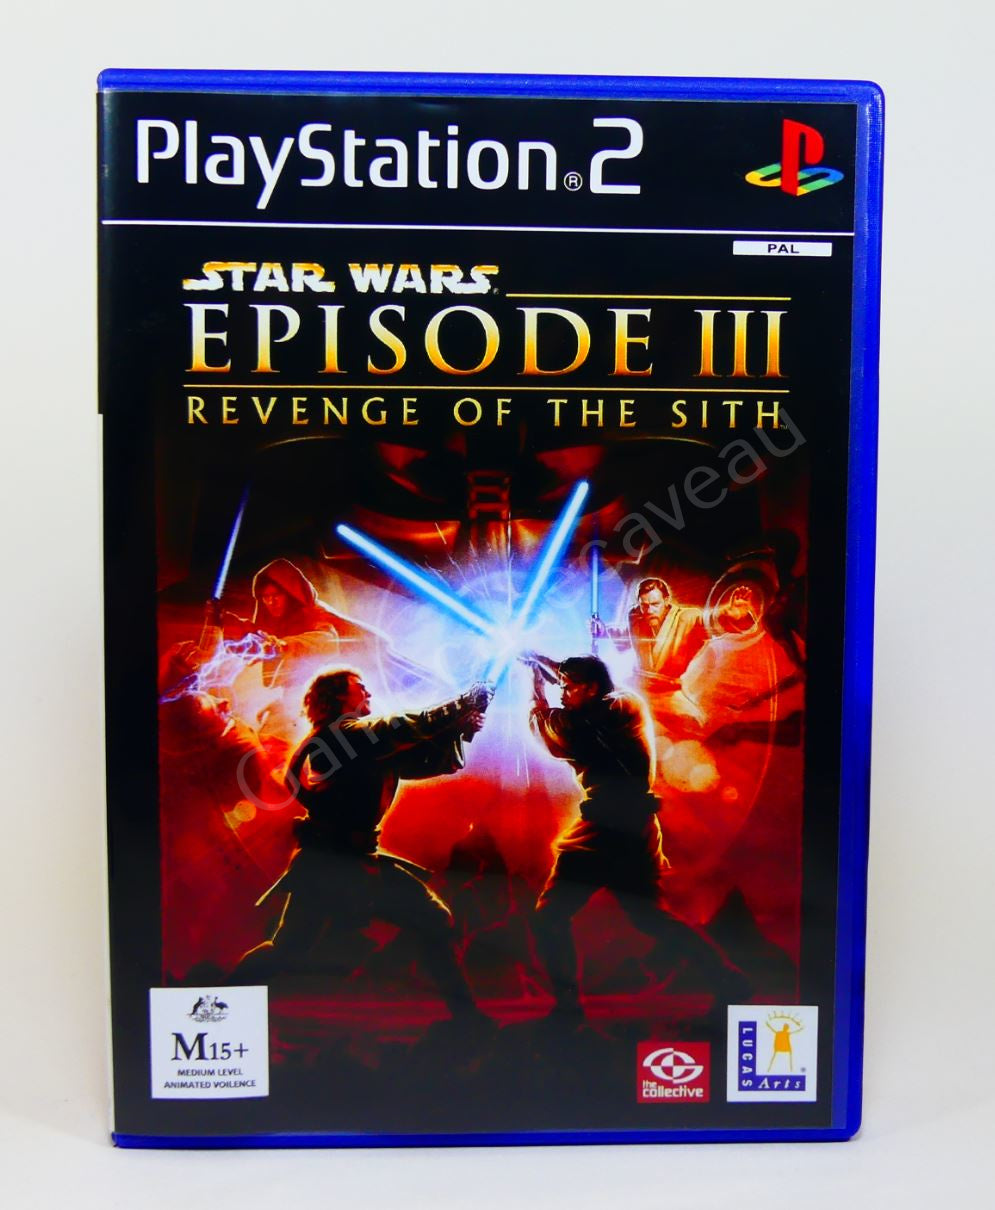 Star Wars Episode III Revenge of the Sith - PS2 Replacement Case